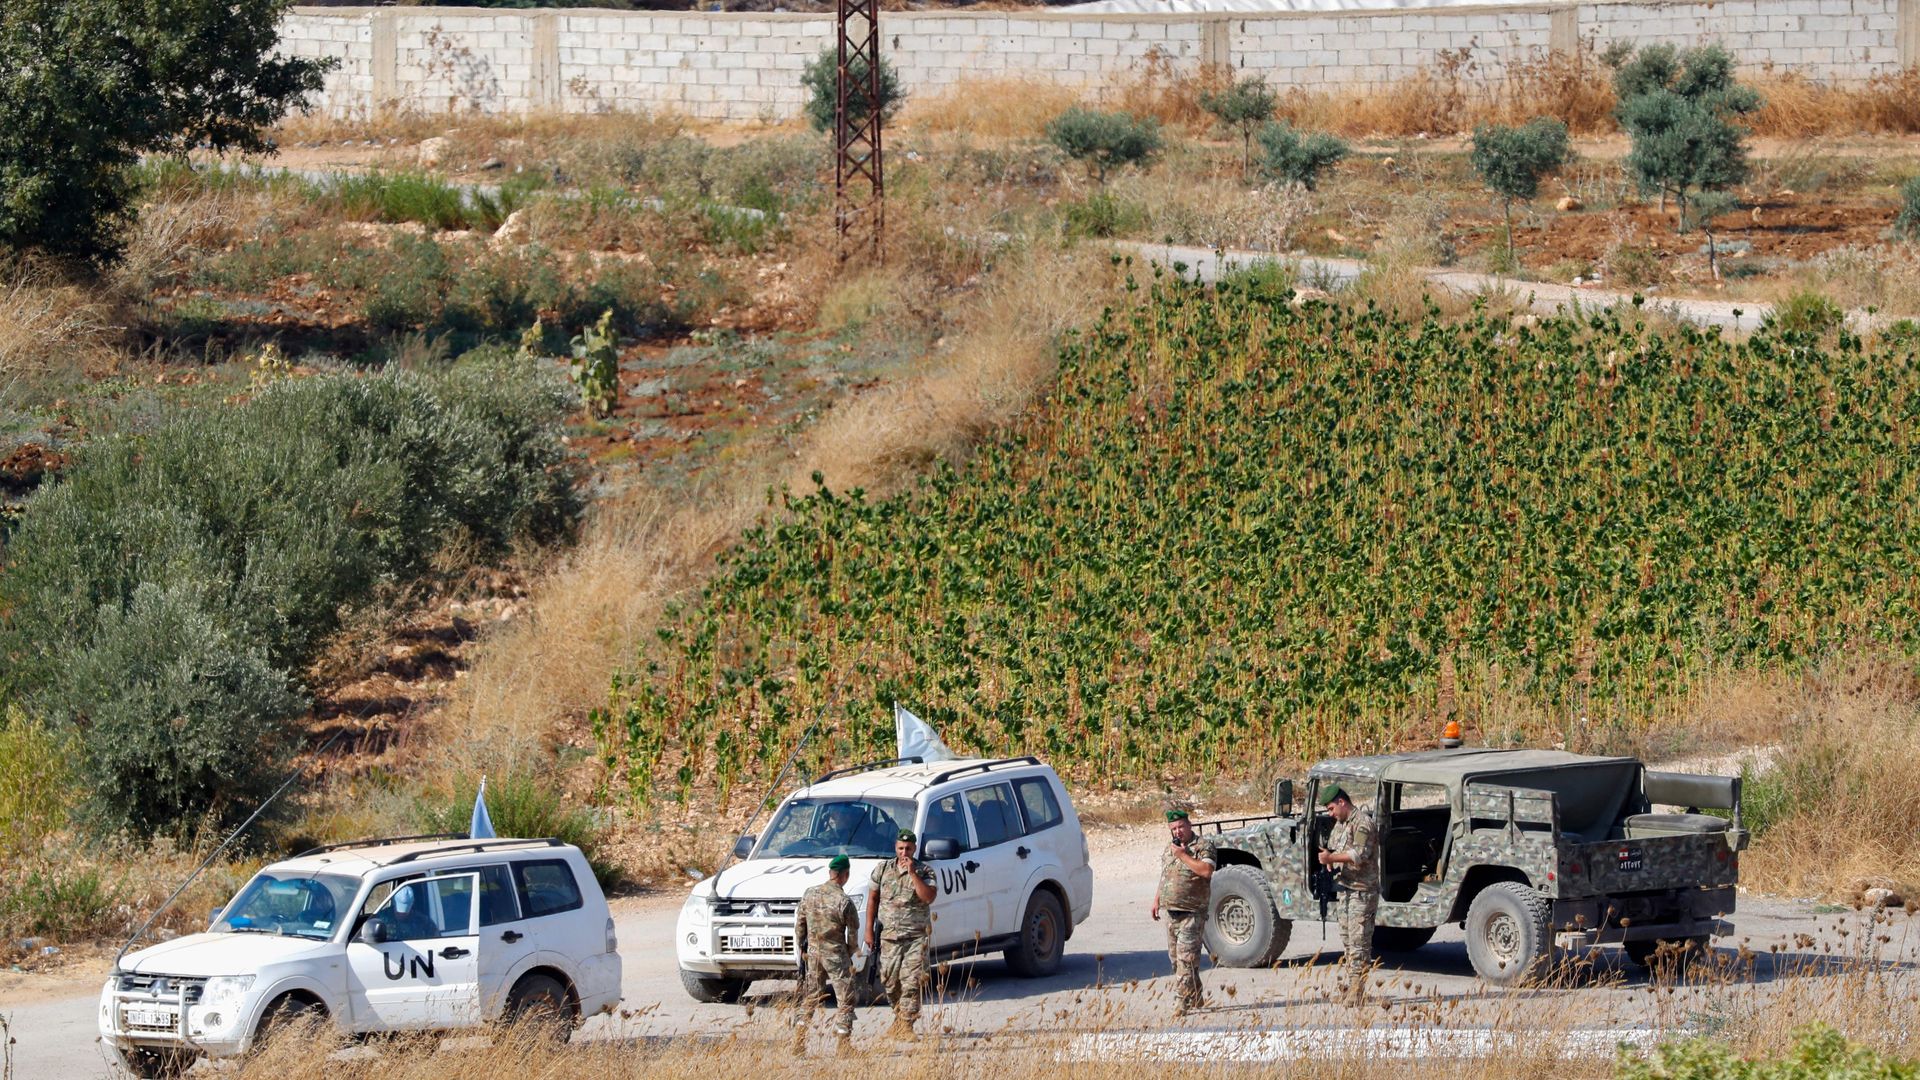 The Lebanese army and United Nations Interim Forces in Lebanon patrolling in the Lebanese village of Aitaroun along the border with Israel.